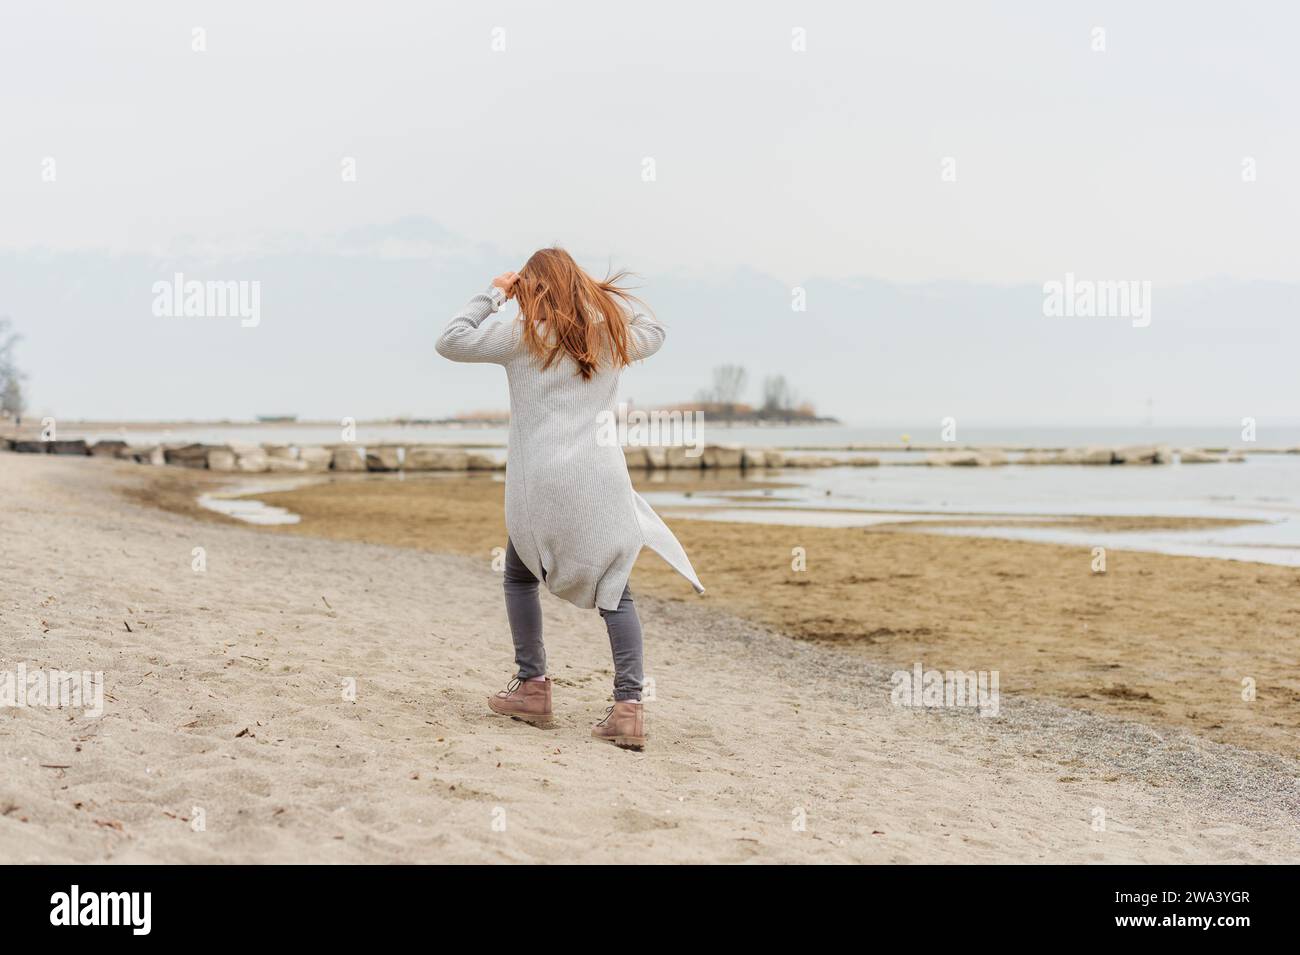 Adorable little girl of 8-9 years old playing by the lake, wearing grey trousers and long cardigan, back view Stock Photo